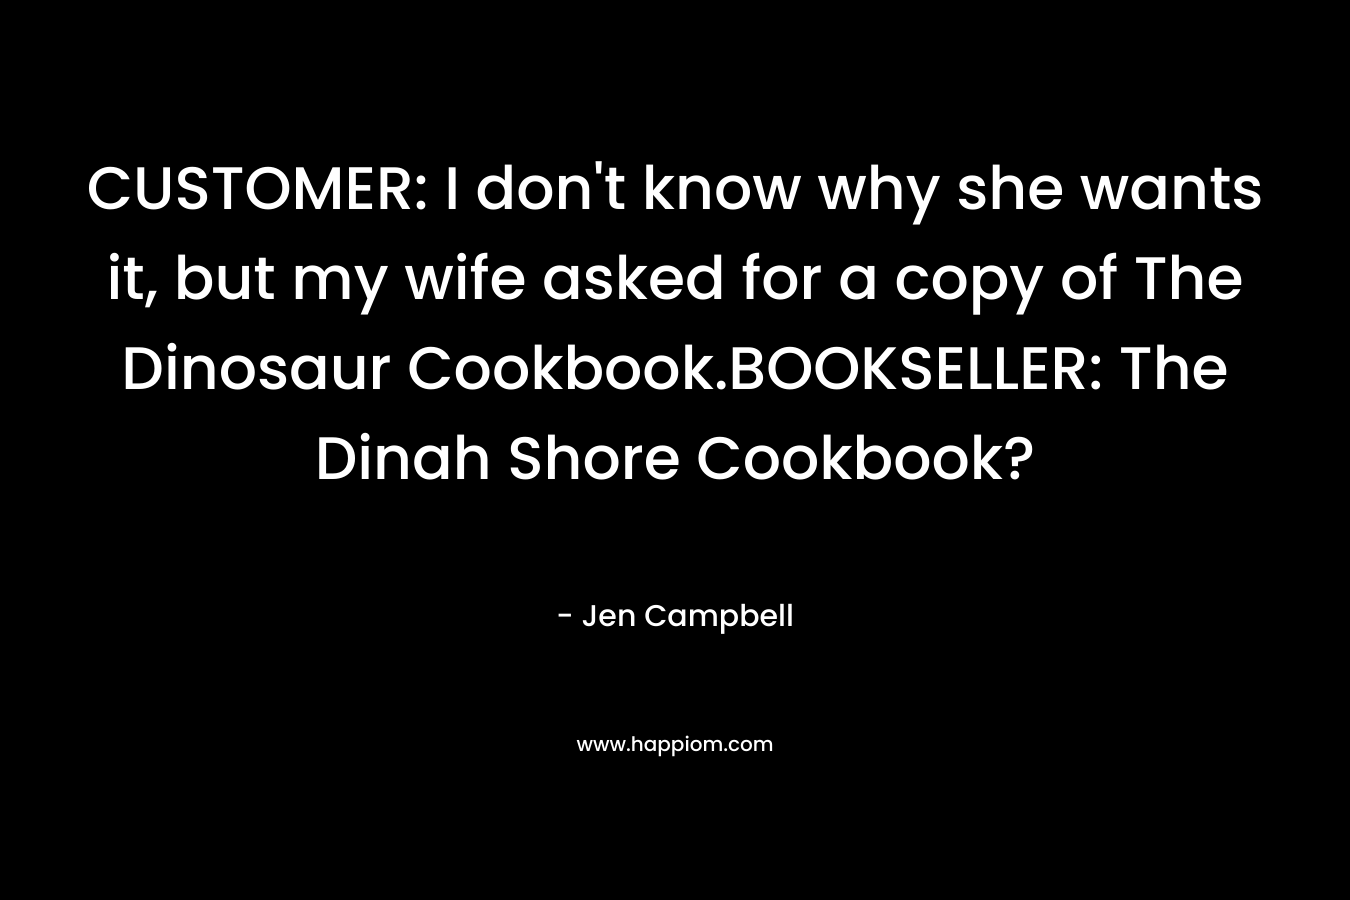 CUSTOMER: I don’t know why she wants it, but my wife asked for a copy of The Dinosaur Cookbook.BOOKSELLER: The Dinah Shore Cookbook? – Jen Campbell